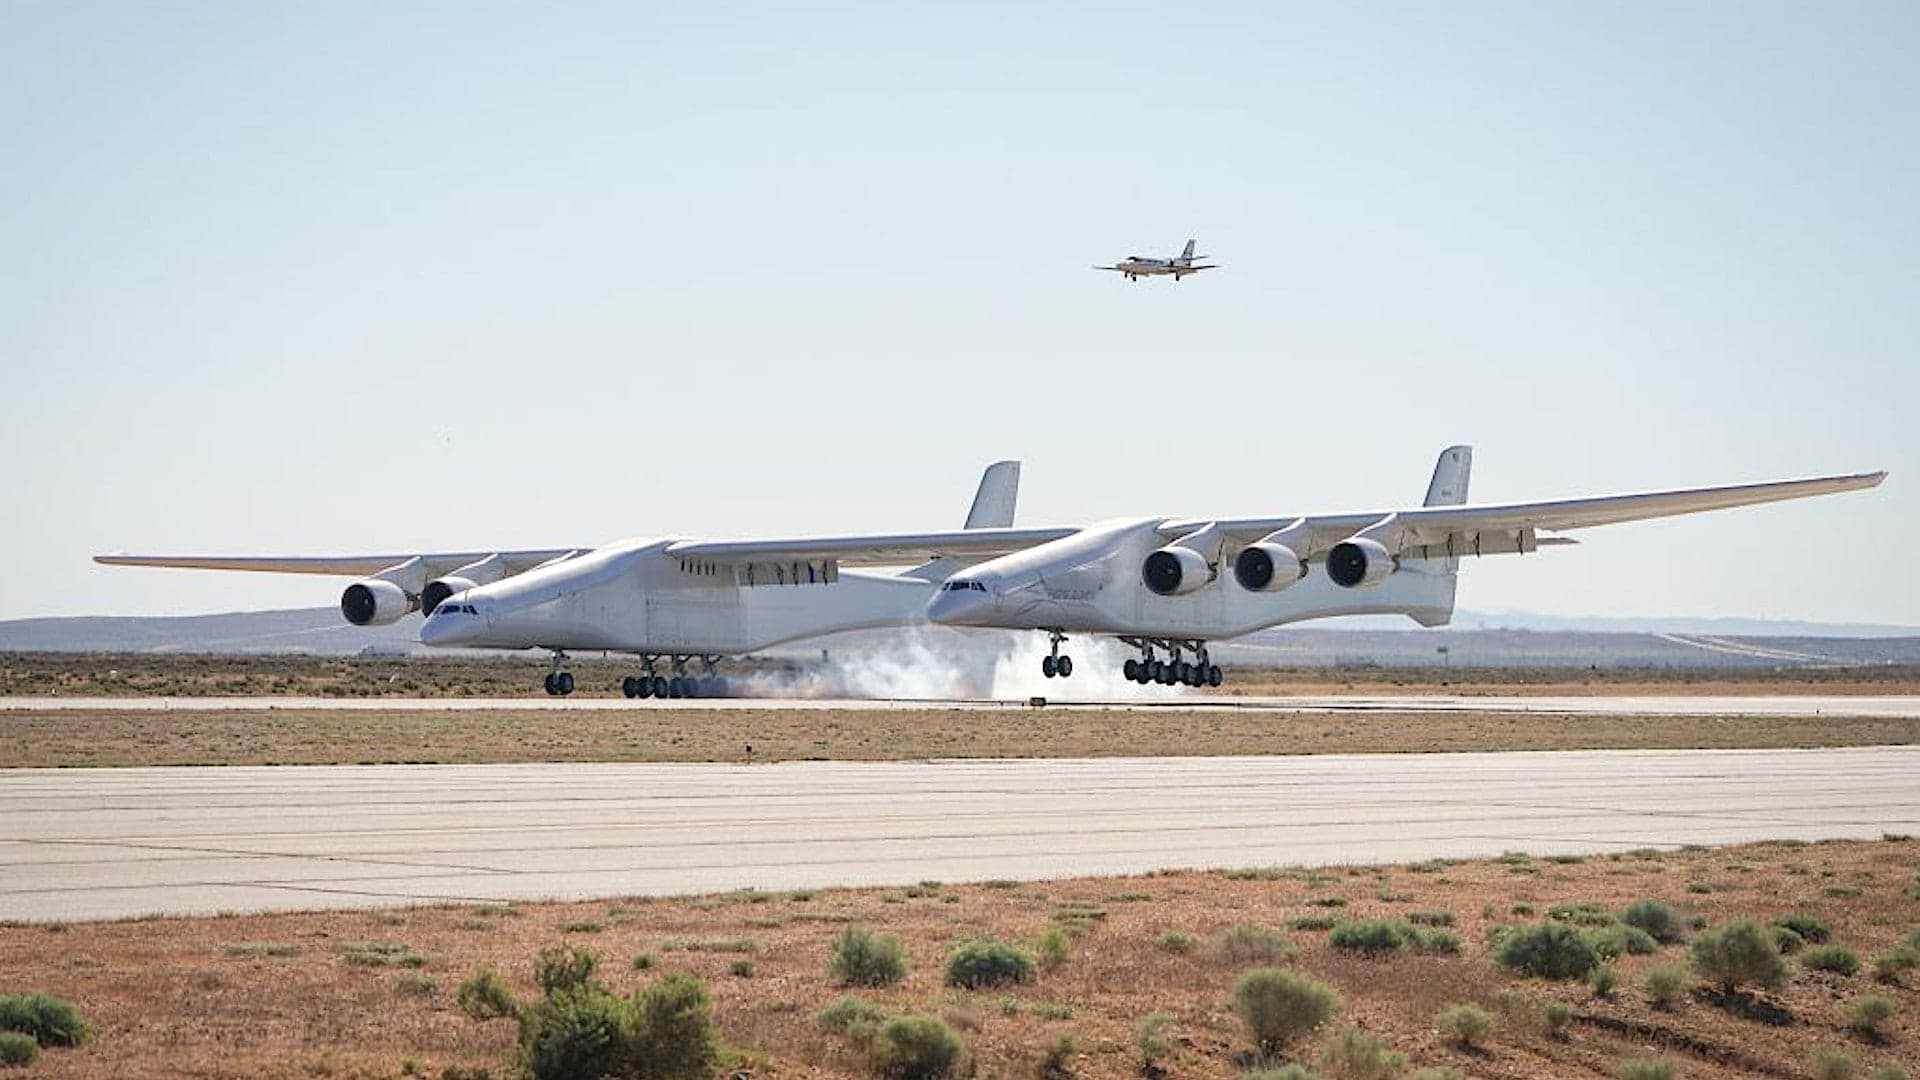 New Owner Of Stratolaunch And World’s Largest Plane To Refocus On Hypersonic Testing